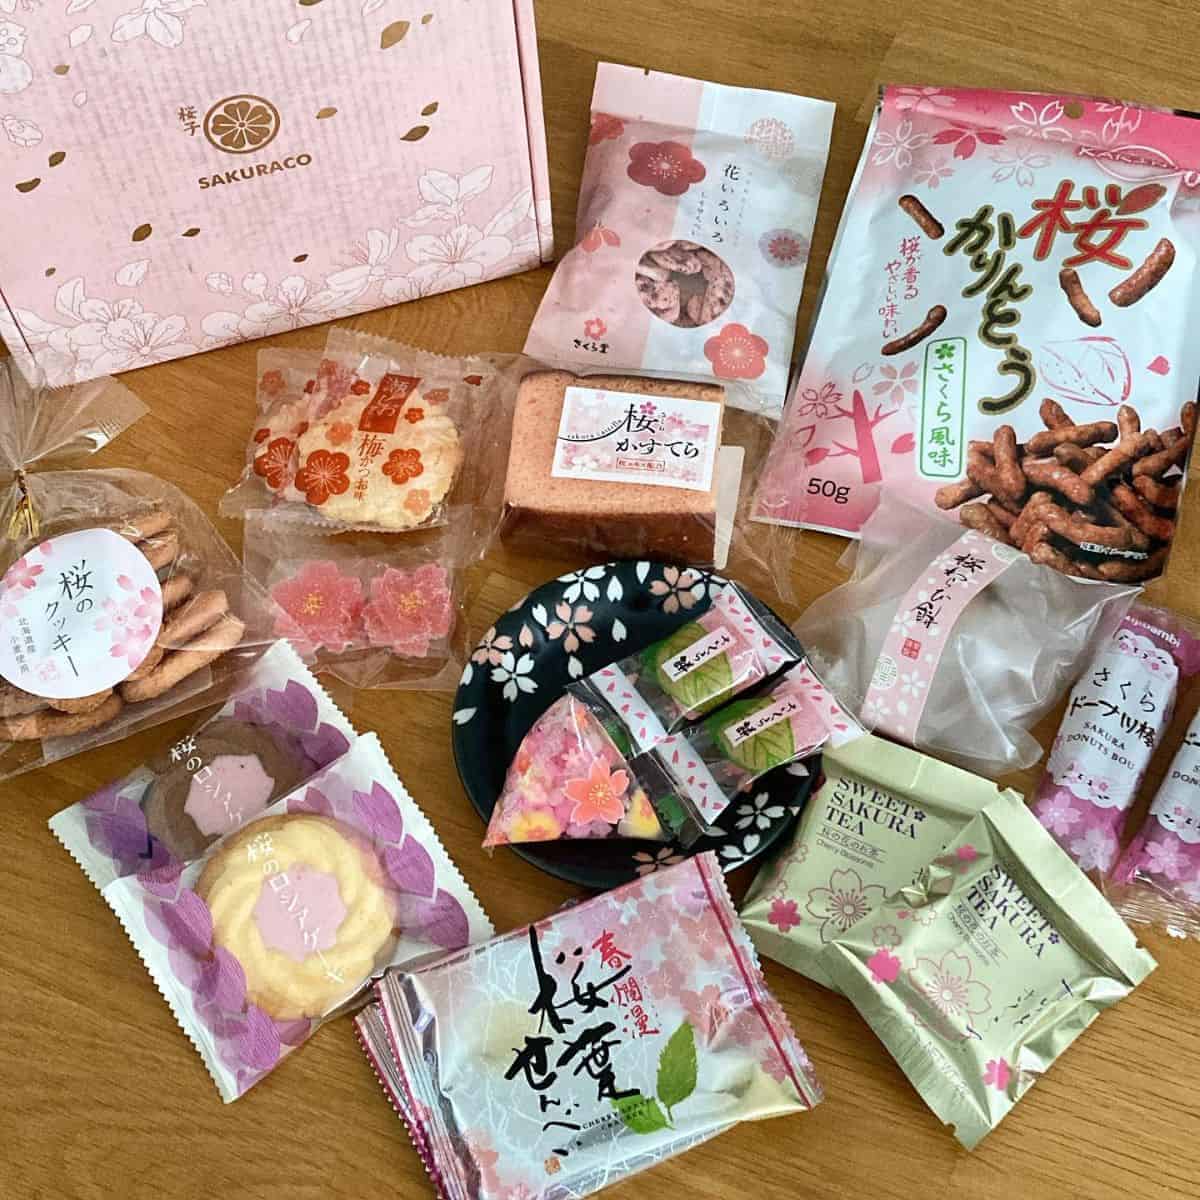 Different Sakuraco snack items laid on the table